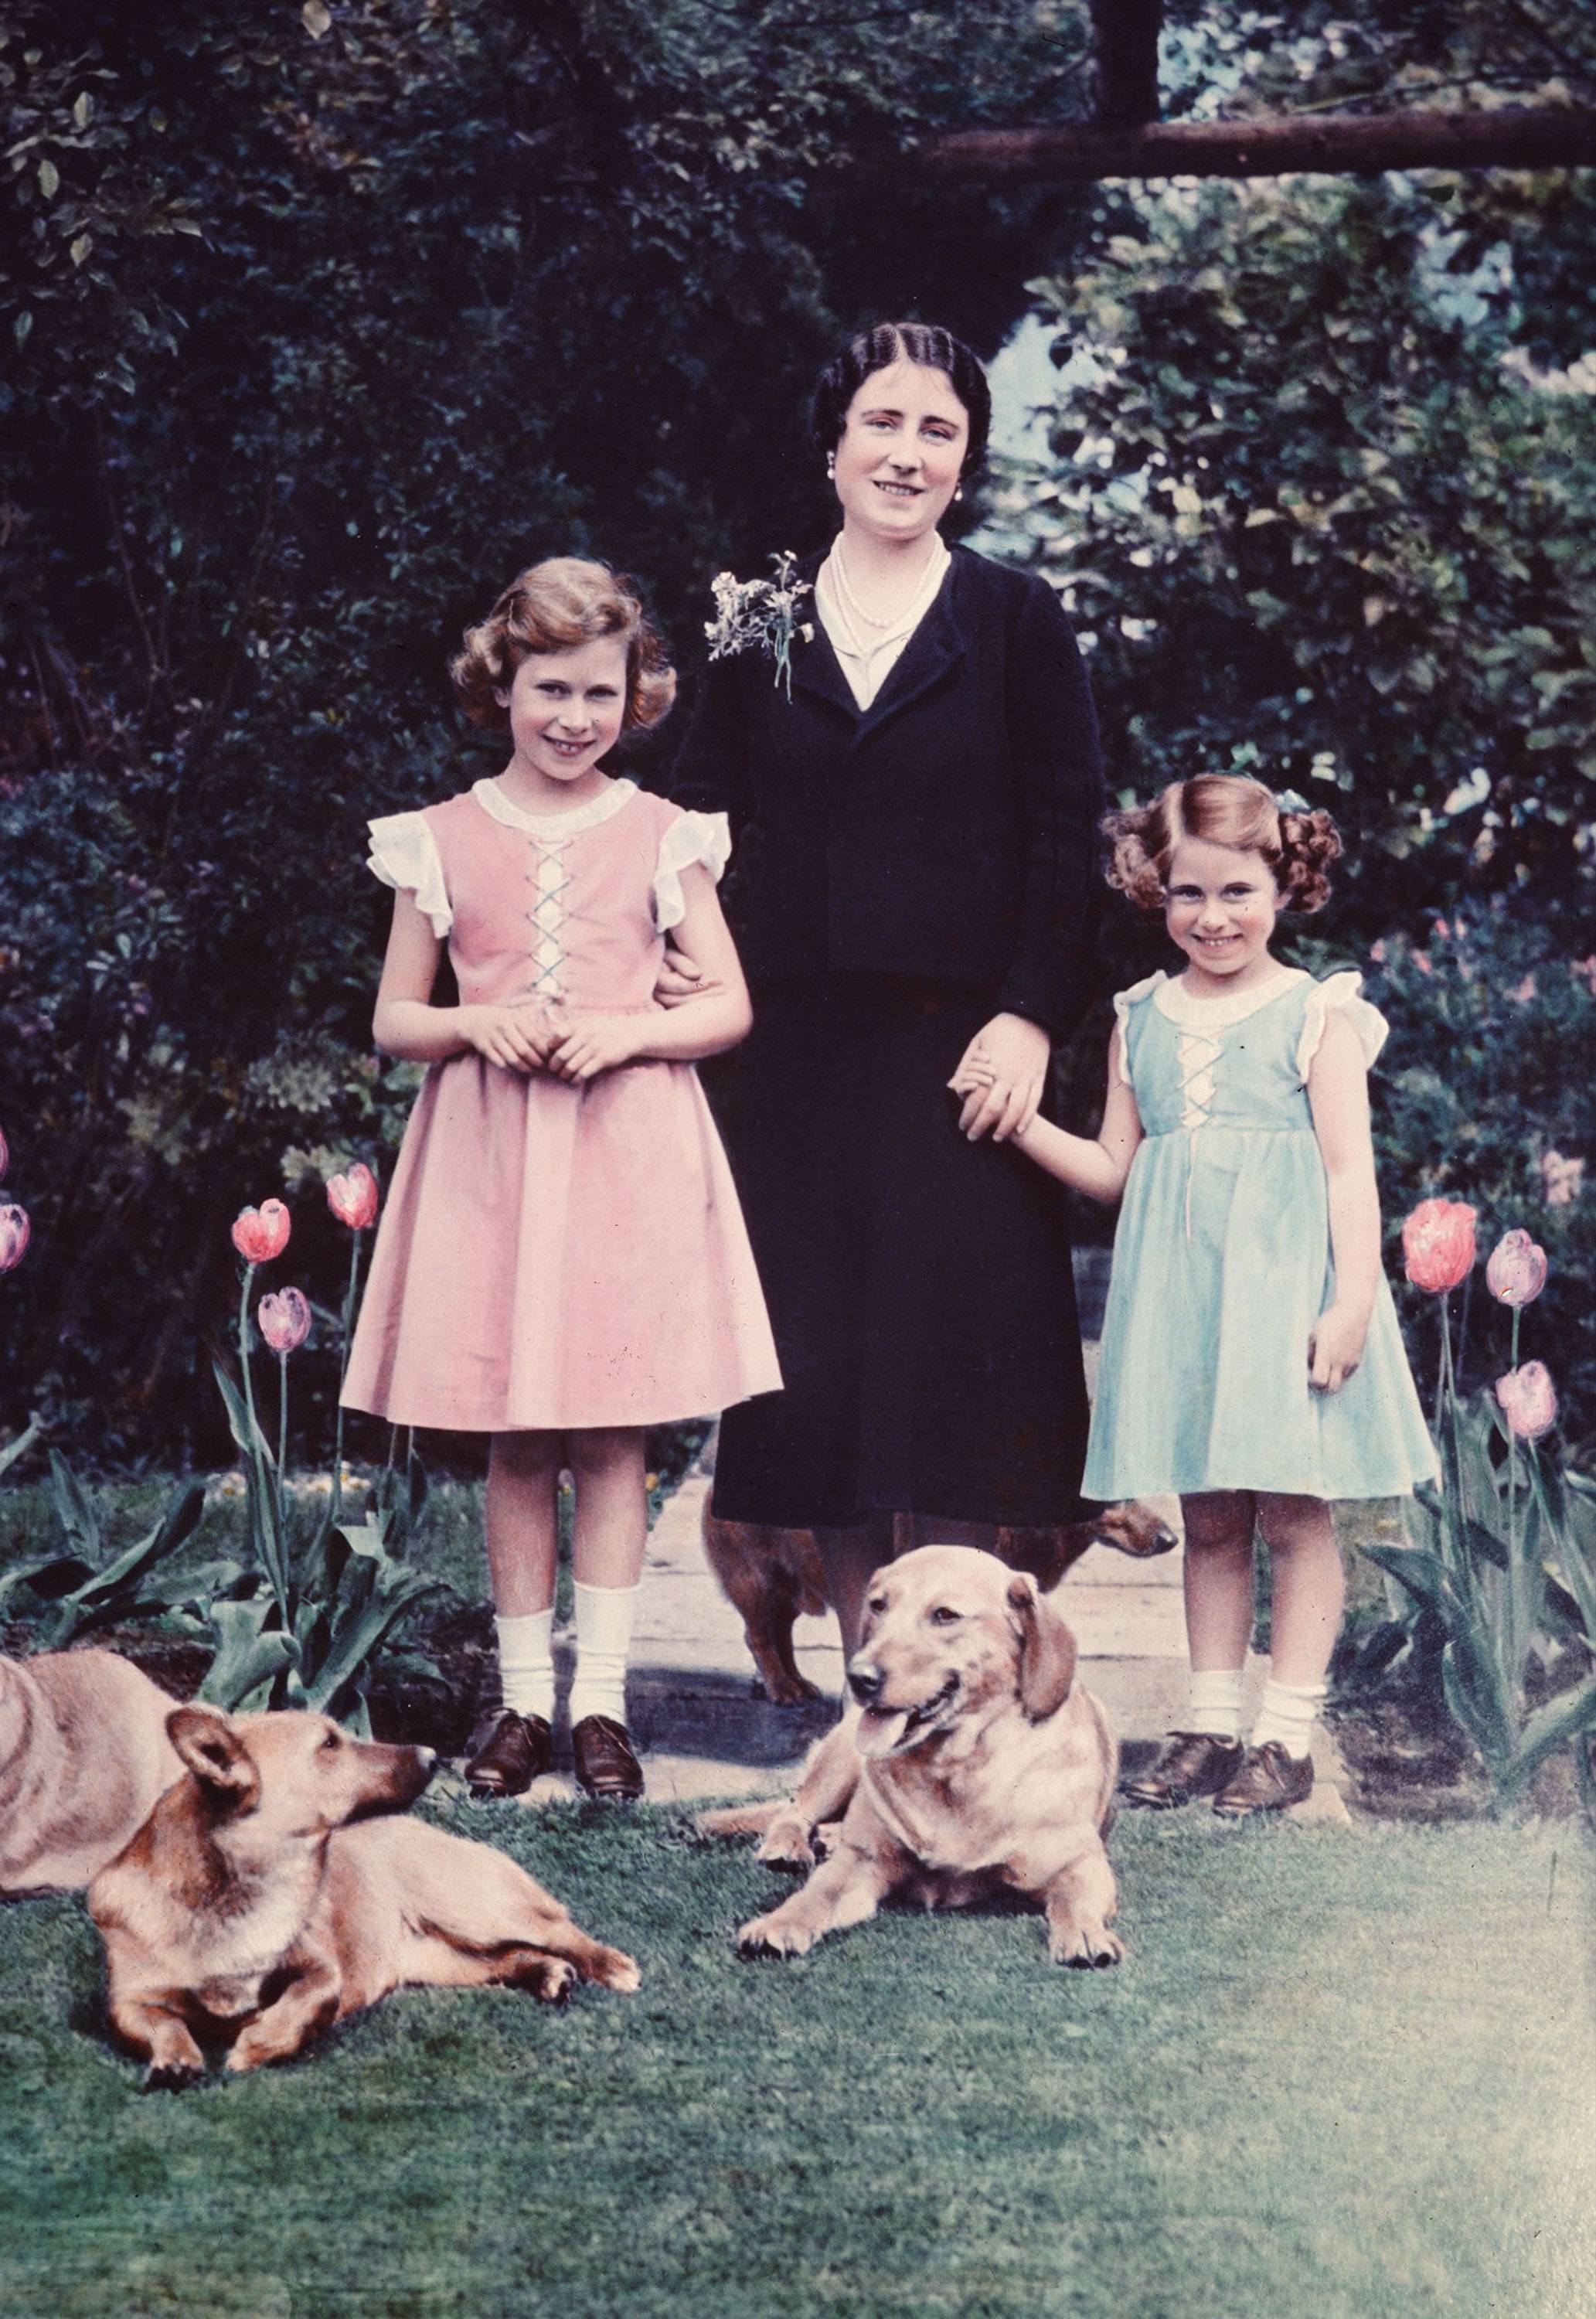 Britain's Queen Elizabeth, center, poses with her two daughters, Princess Elizabeth, left, and Princess Margaret, in June 1936 in the garden of the Royal Lodge at Windsor, England.